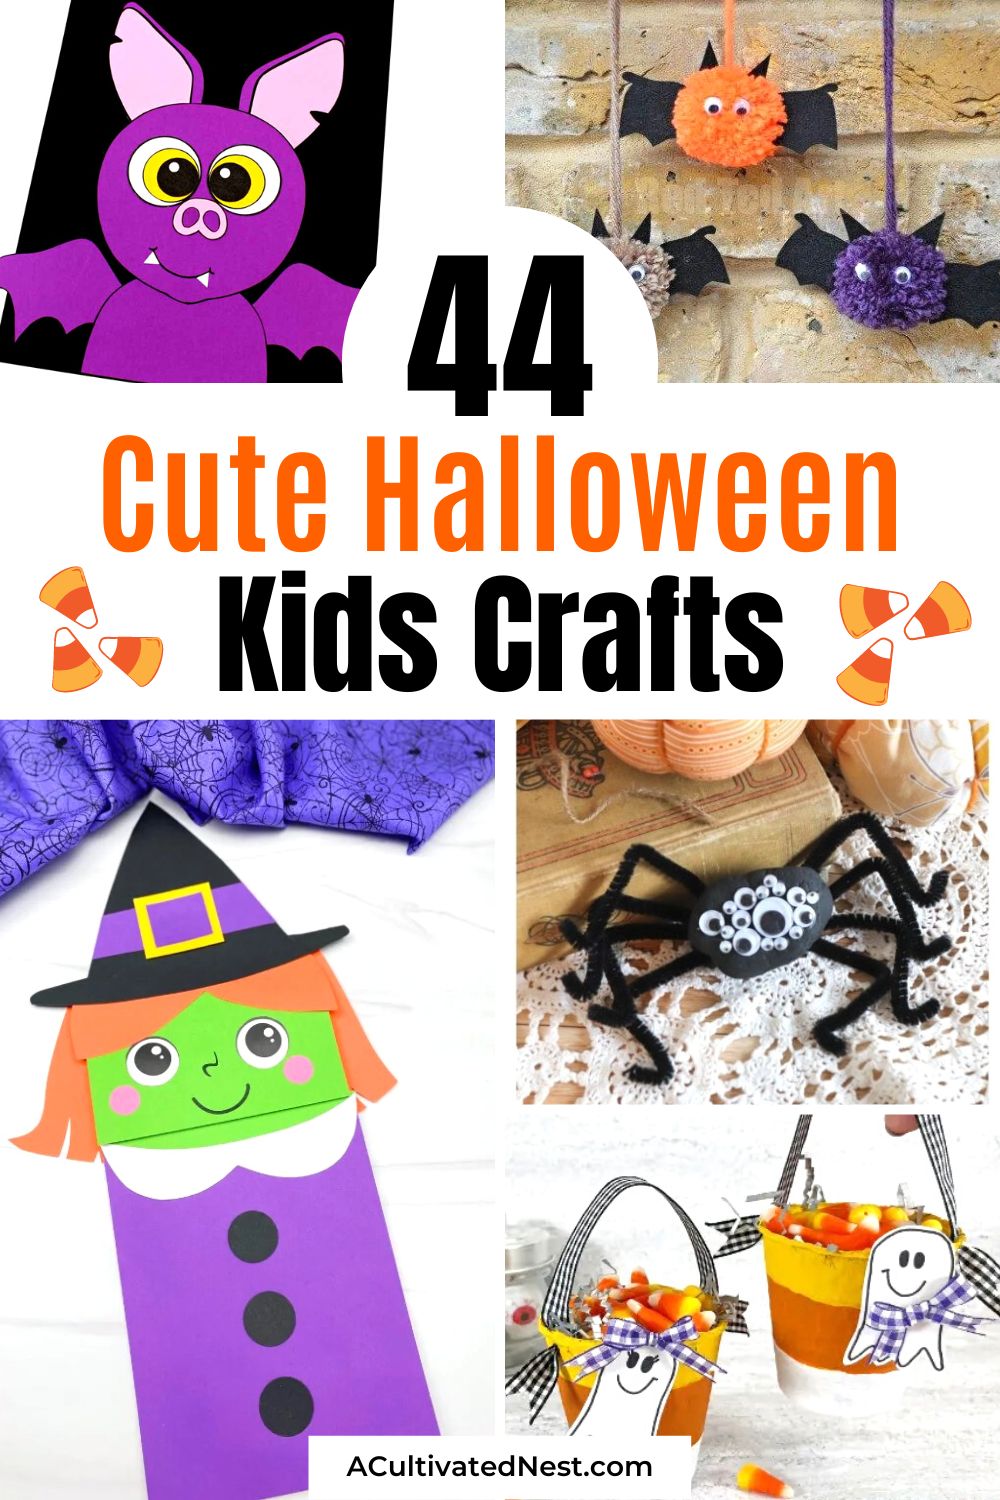 44 Cute Halloween Kids Crafts- Trick or treat? Treat your kids to hours of Halloween crafting fun! Discover cute and easy Halloween kids crafts they'll love, from spooky spiders to friendly monsters. | #CraftingWithKids #FamilyFun #Halloween #HalloweenDIY #ACultivatedNest